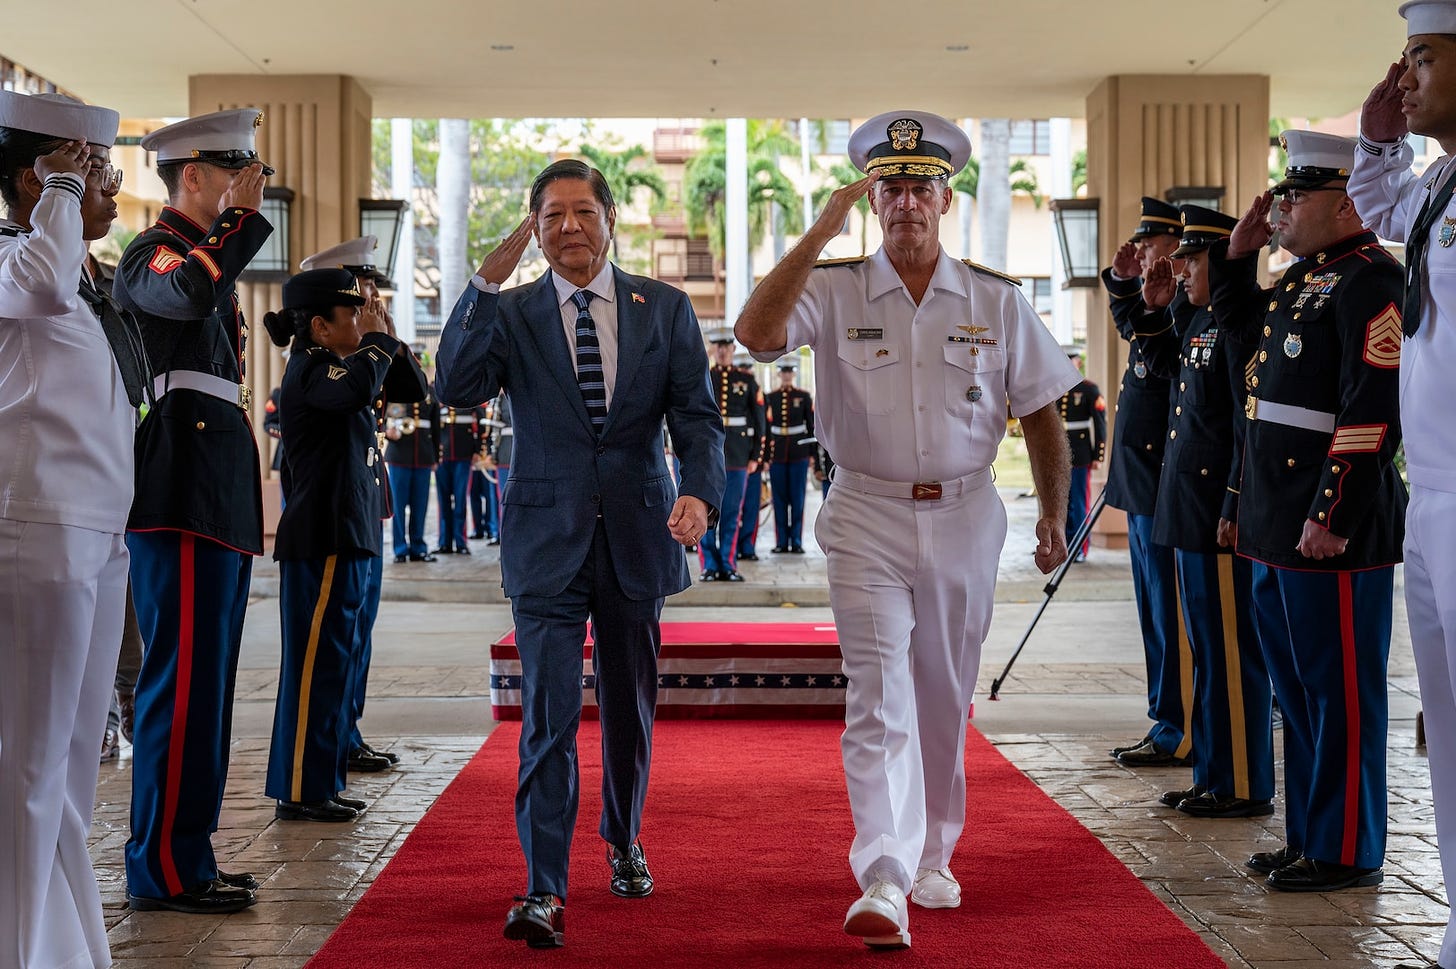 Philippine President Ferdinand R. Marcos Jr., left, walks alongside Adm. John C. Aquilino, commander, U.S. Indo-Pacific Command, during an honors ceremony at USINDOPACOM headquarters, Camp H.M. Smith, in Honolulu, Nov. 19, 2023. The visit included exchanges on regional security and mutual partnership, further developing the strong democratic, economic and strategic partnership with the Philippines codified in the 1951 U.S.-Philippines Mutual Defense Treaty. USINDOPACOM is committed to enhancing stability in the Indo-Pacific region by promoting security cooperation, encouraging peaceful development, responding to contingencies, deterring aggression and, when necessary, fighting to win. (U.S. Navy photo by Mass Communication Specialist 1st Class John Bellino)